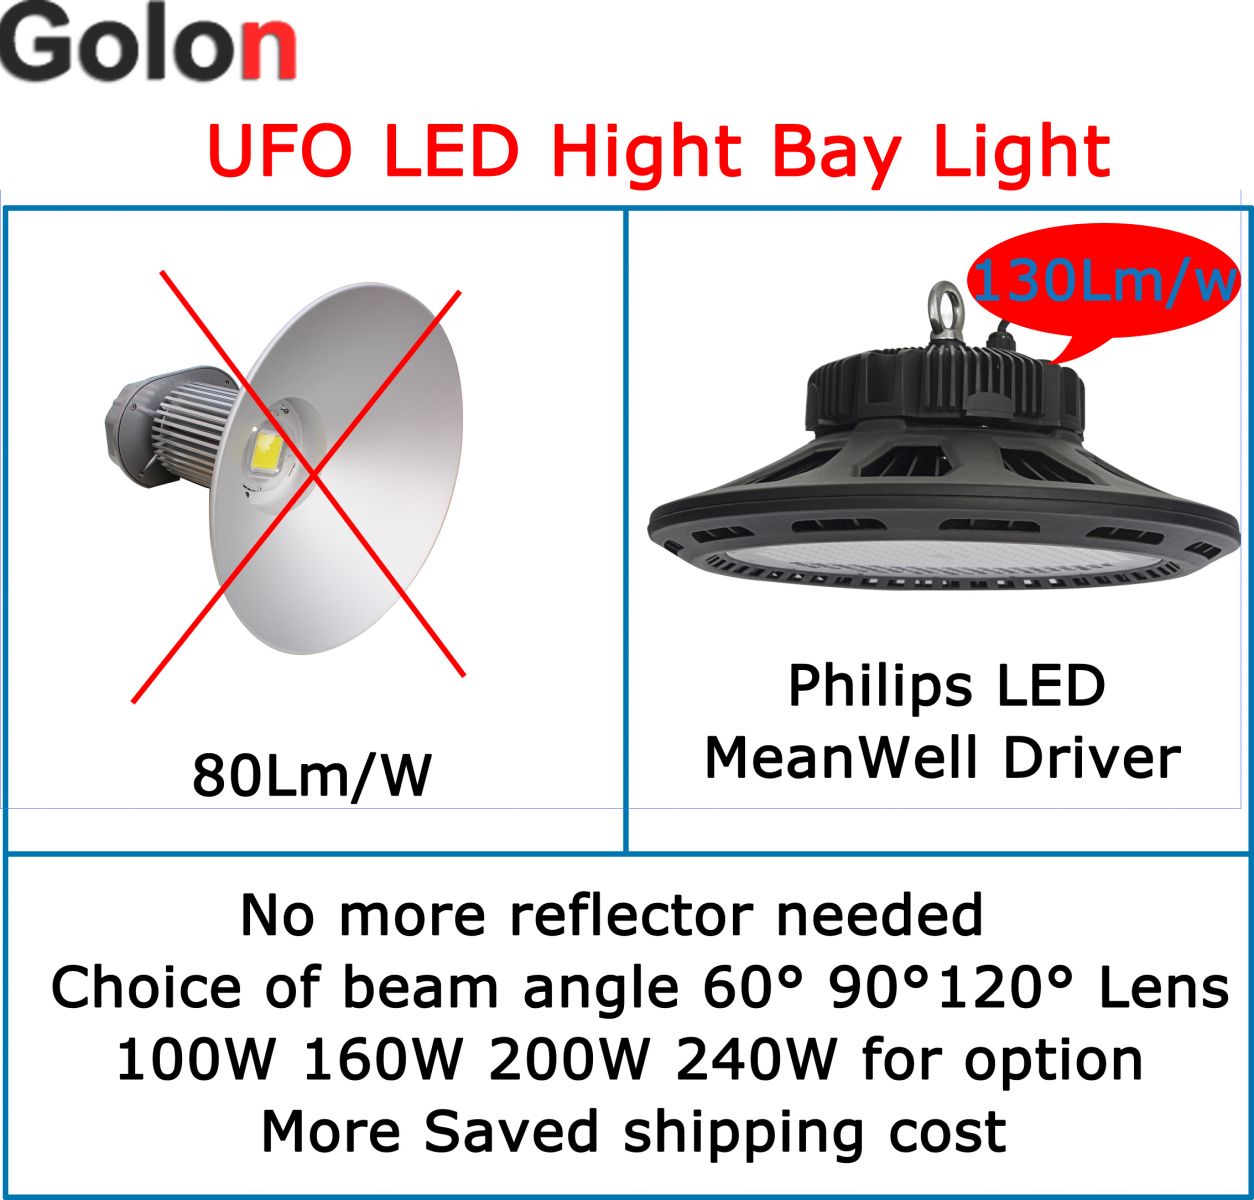 Replace 800W HPS IP65 Waterproof cUL DLC Listed 5000K Daylight AC100-277V 200W LED UFO High Bay/Low Bay Light Fixture Warehouse Workshop Garage Barn Factory Ceiling Highbay/Lowbay Light Industrial Commercial UFO Lighting 